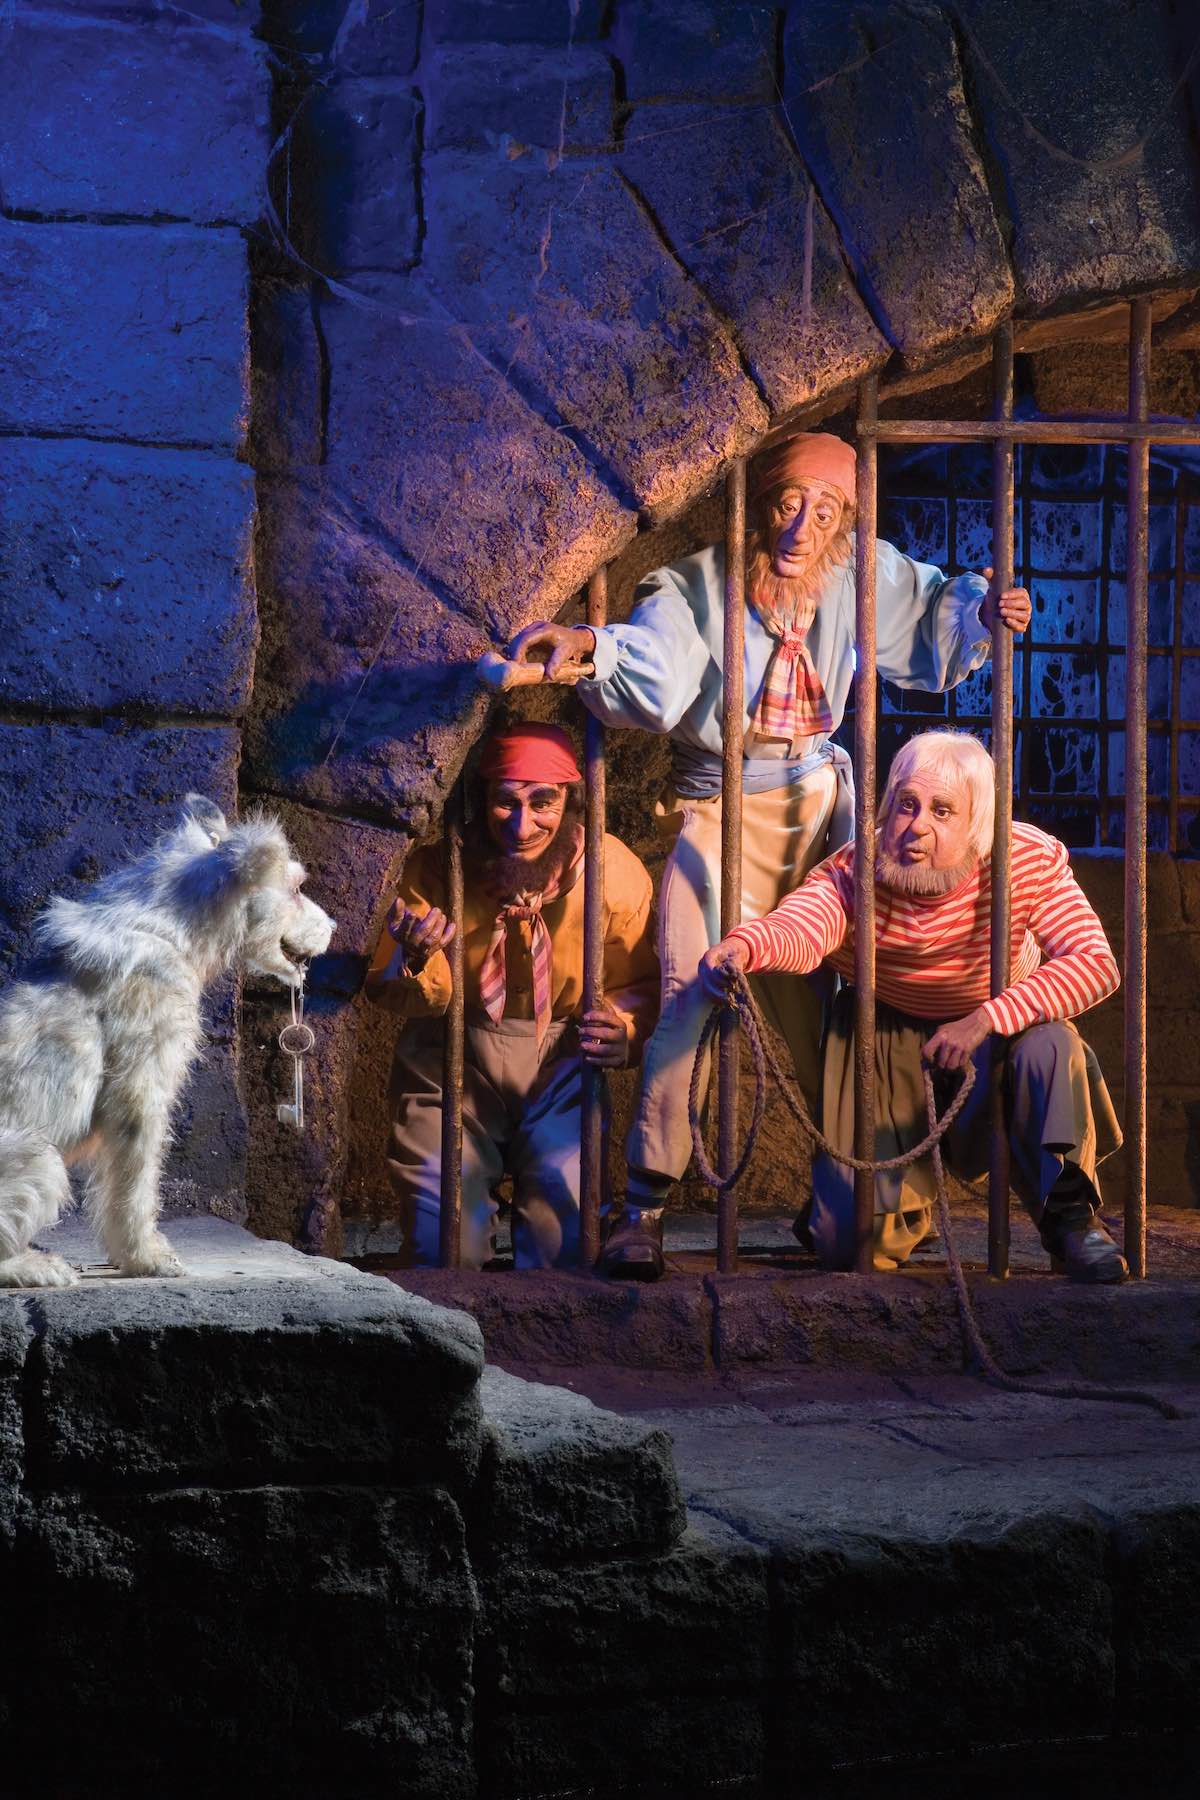 Pirate-themed Audio-Animatronics figures at the Pirates of the Caribbean attraction.